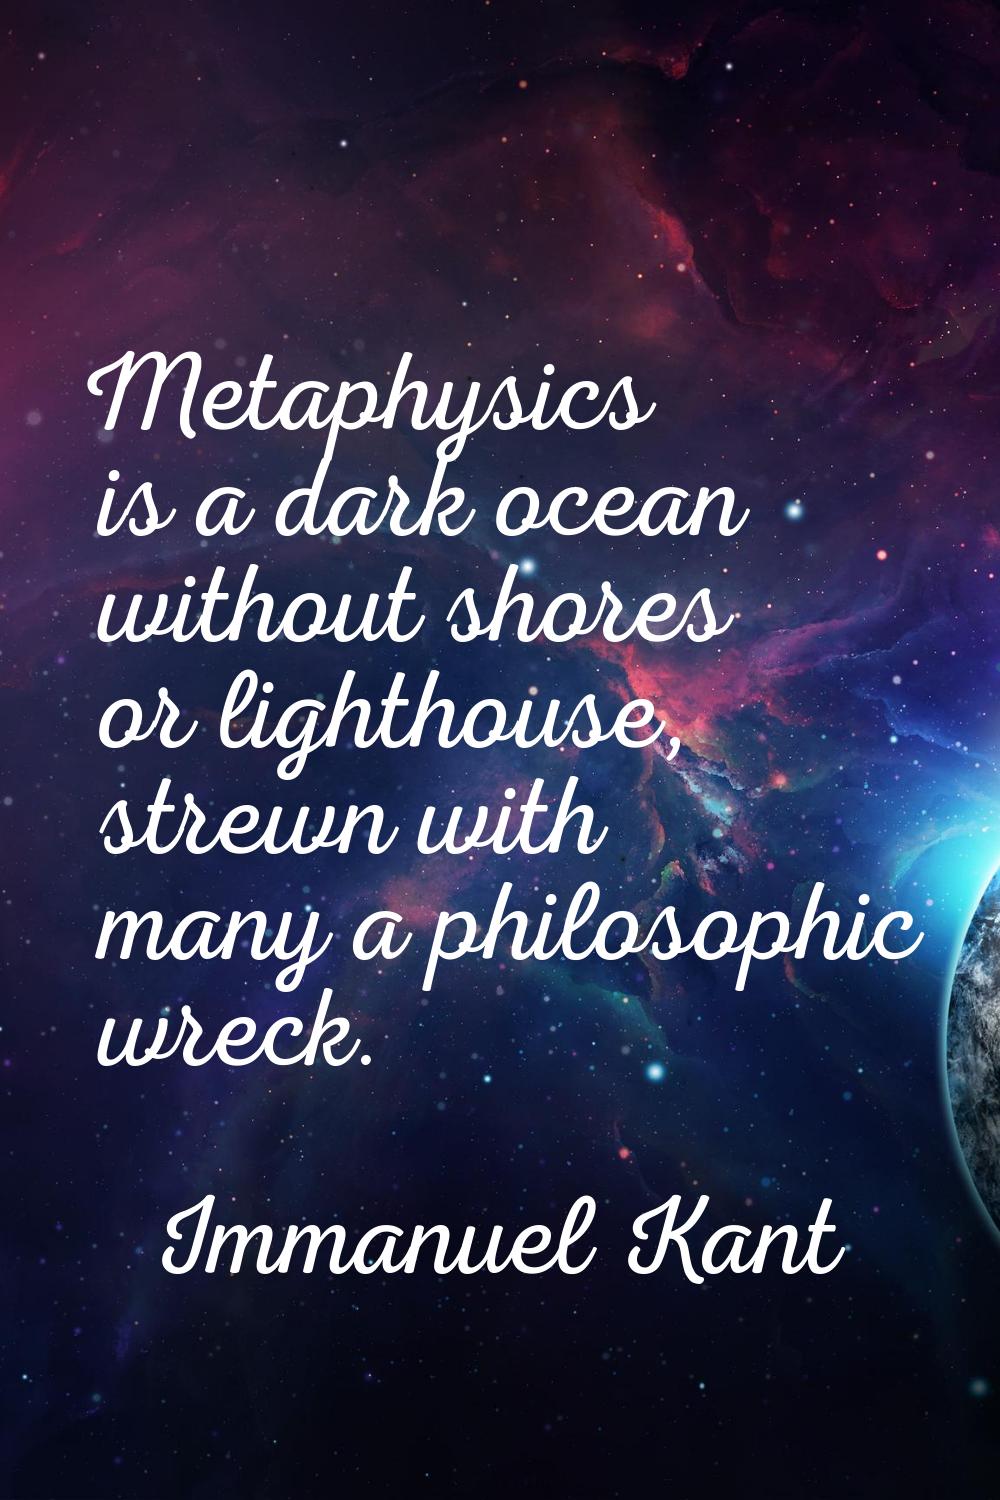 Metaphysics is a dark ocean without shores or lighthouse, strewn with many a philosophic wreck.